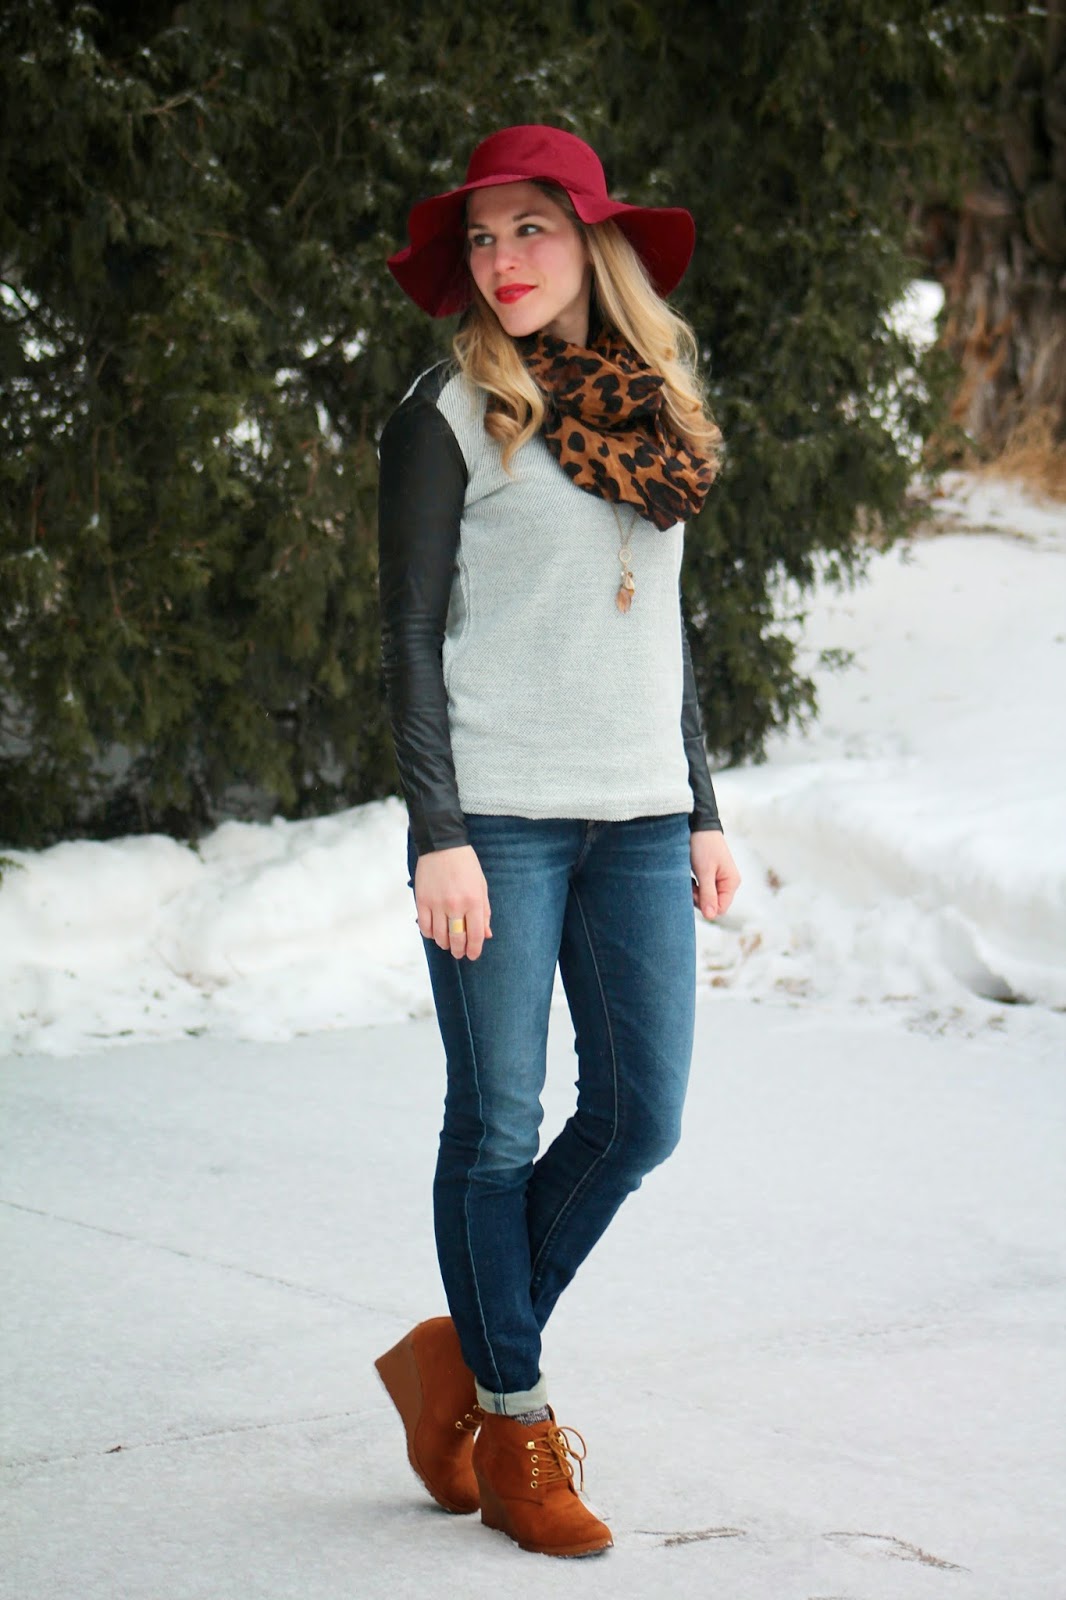 Marled Sweater and Floppy Hat